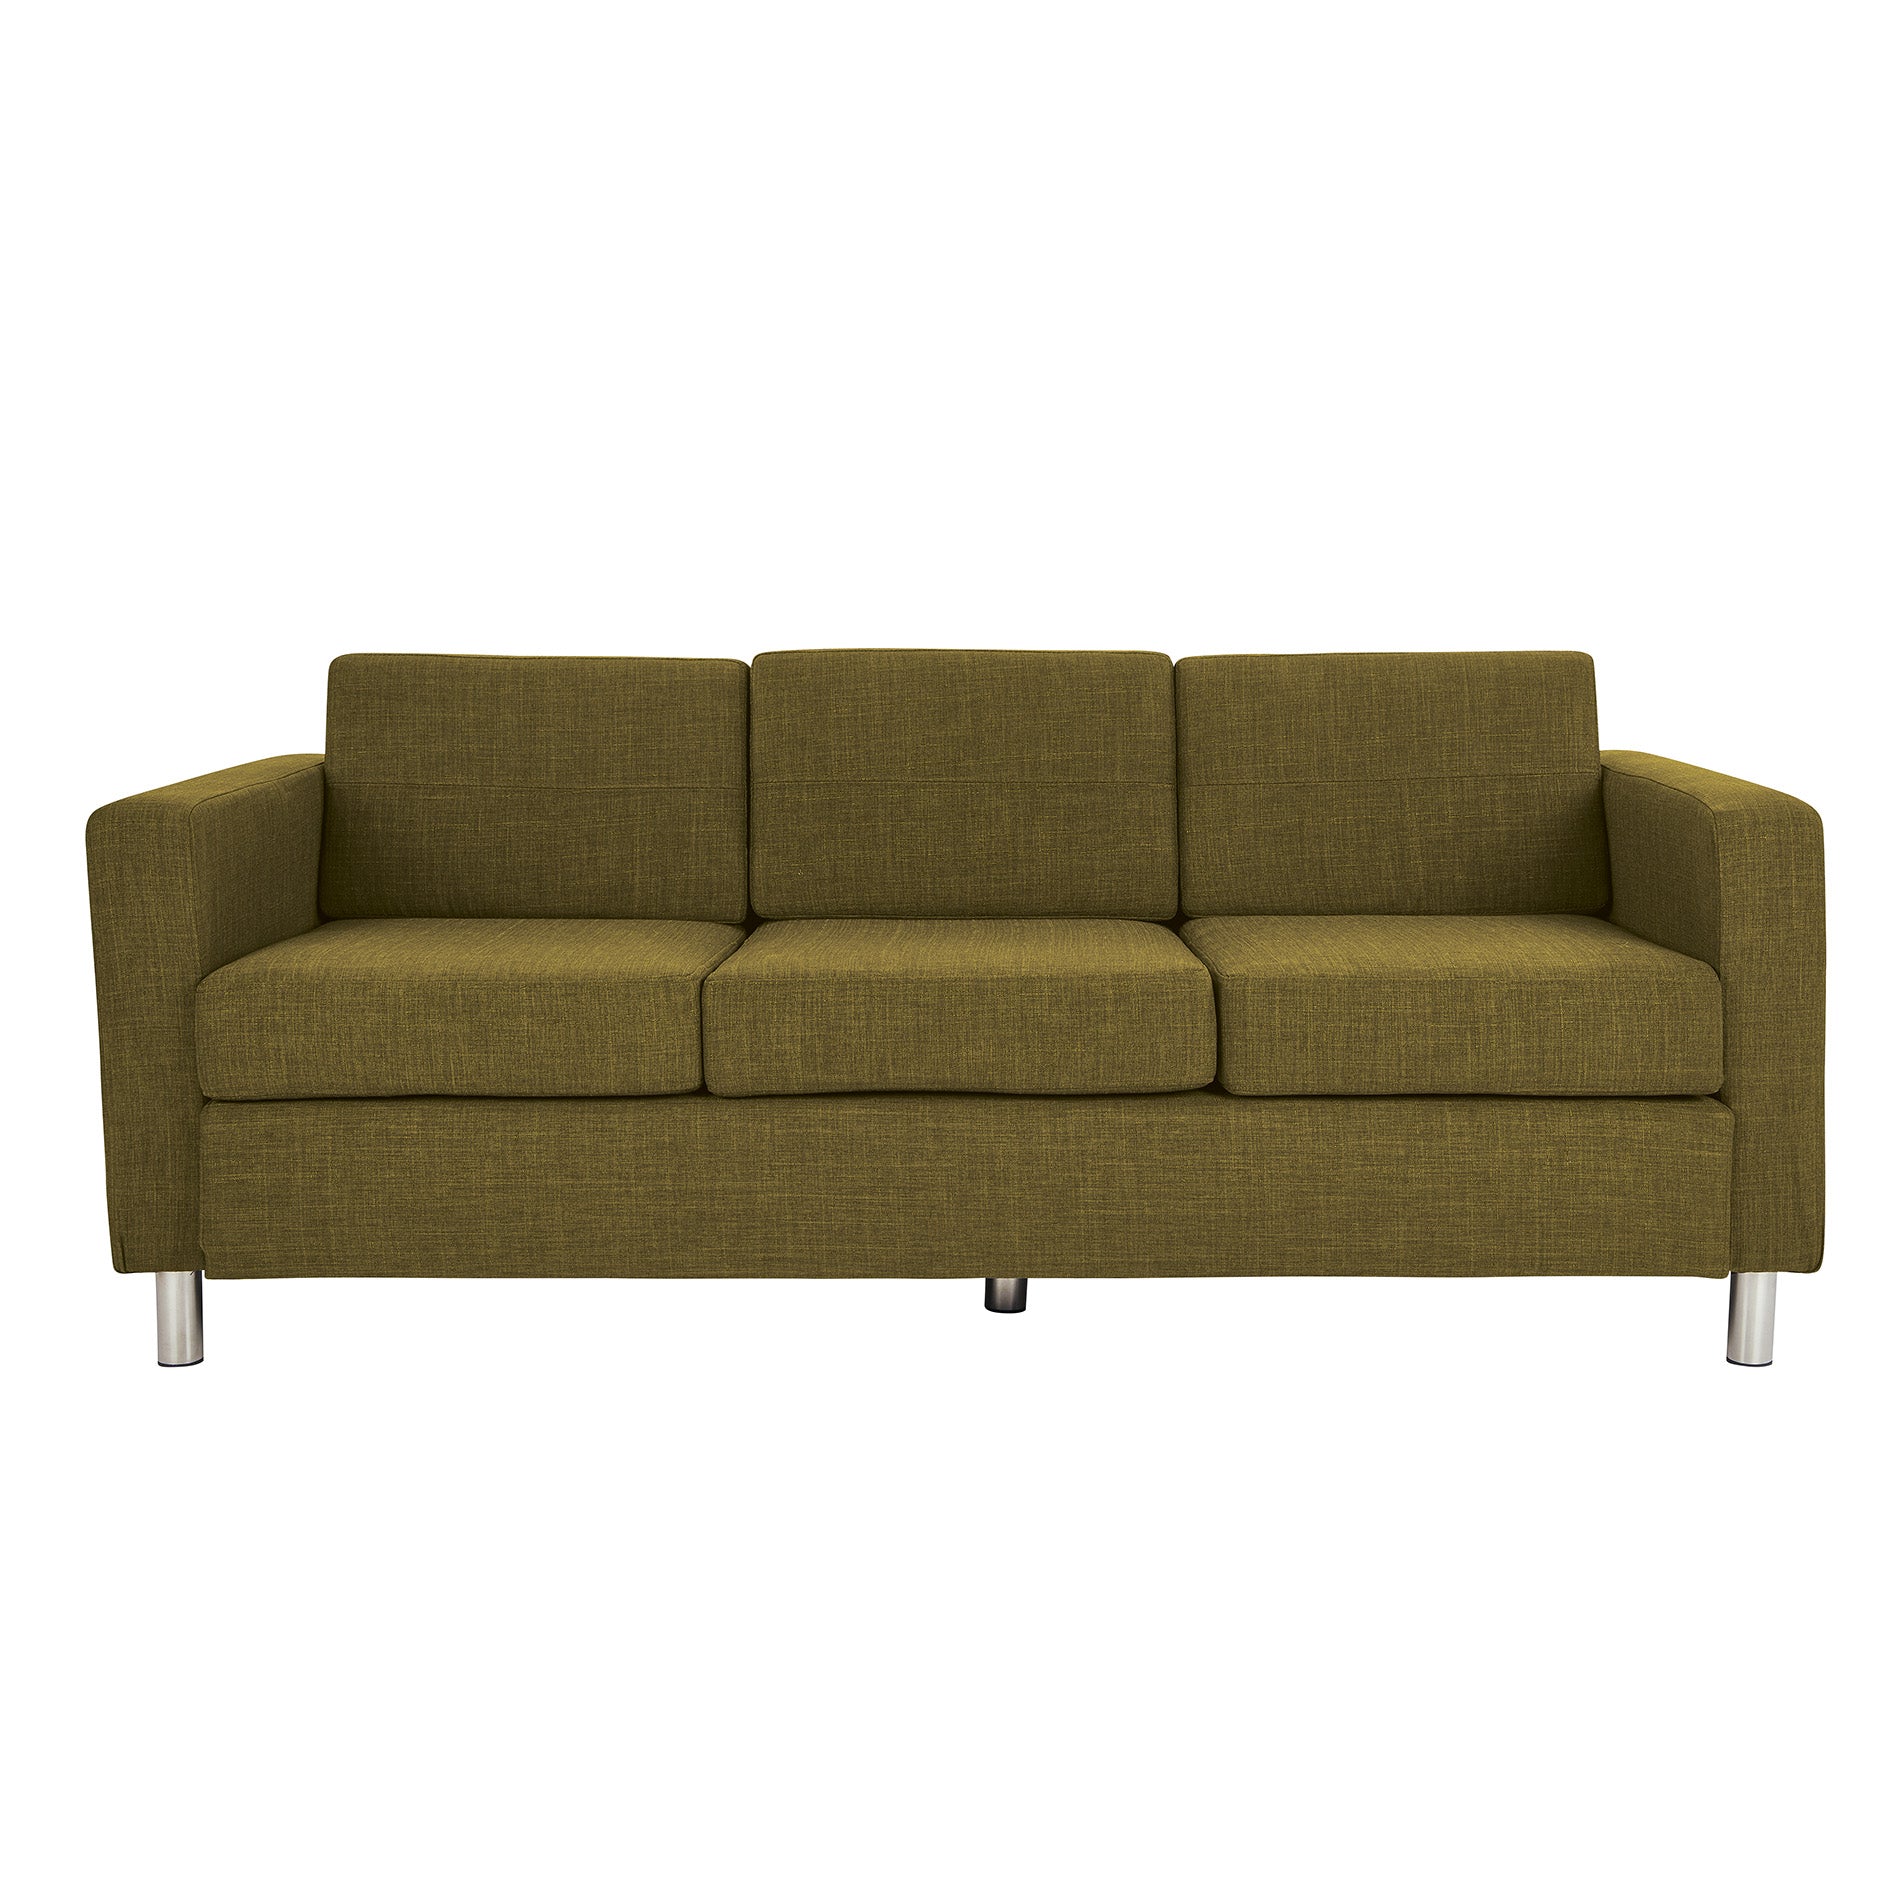 PAC53-F - Pacific Fabric Sofa with Chrome Finish Legs by Office Star